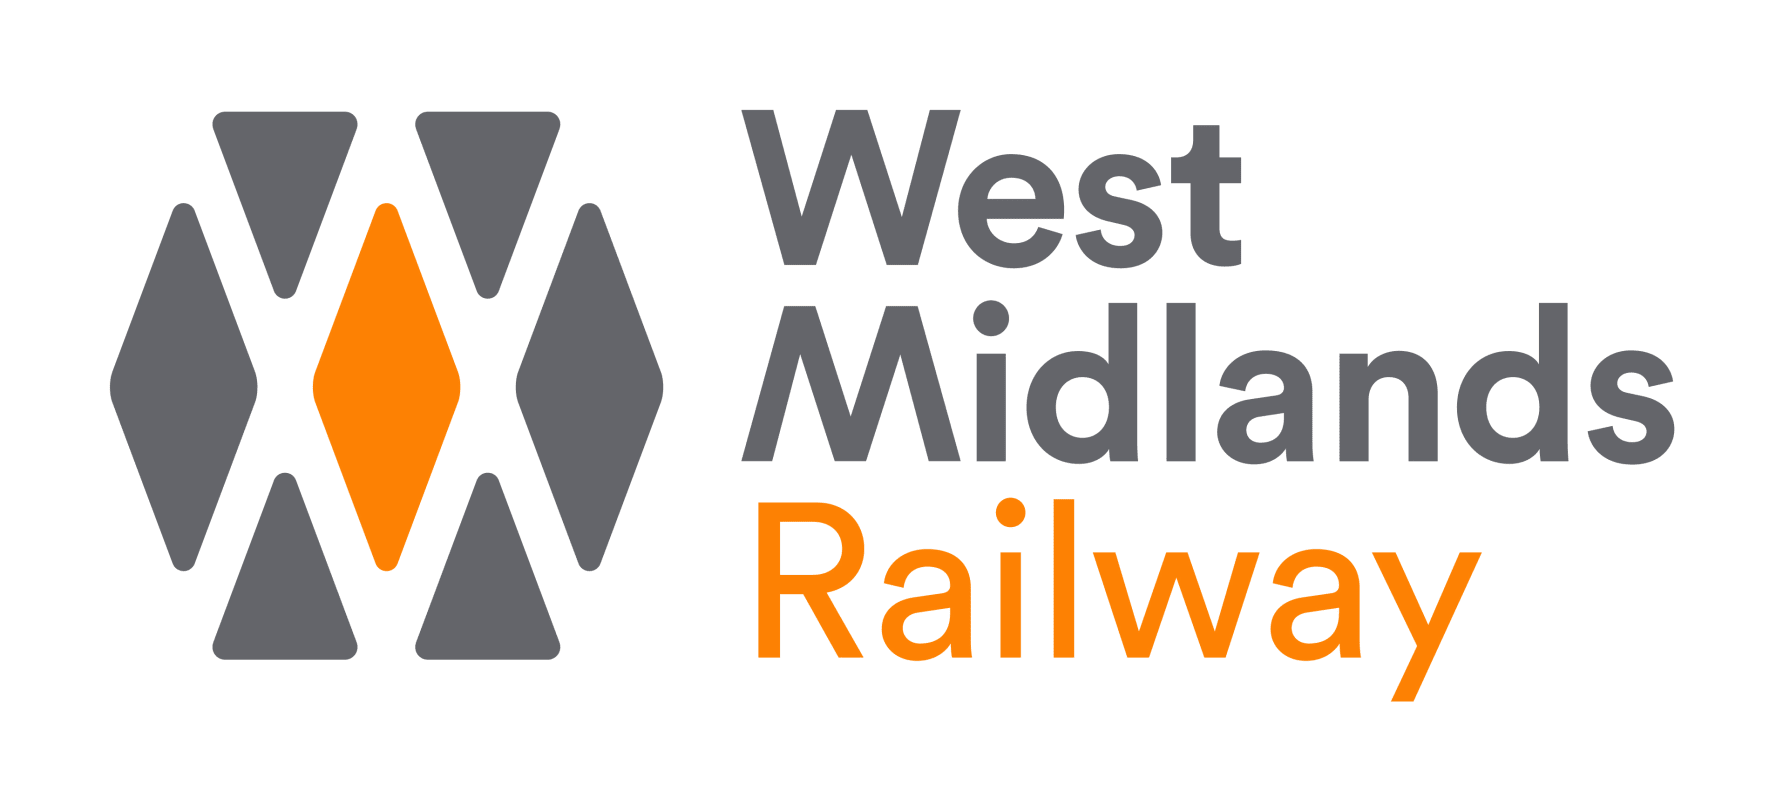 Coronavirus: West Midlands Railway confirms rail replacement for Hereford-Worcester passengers